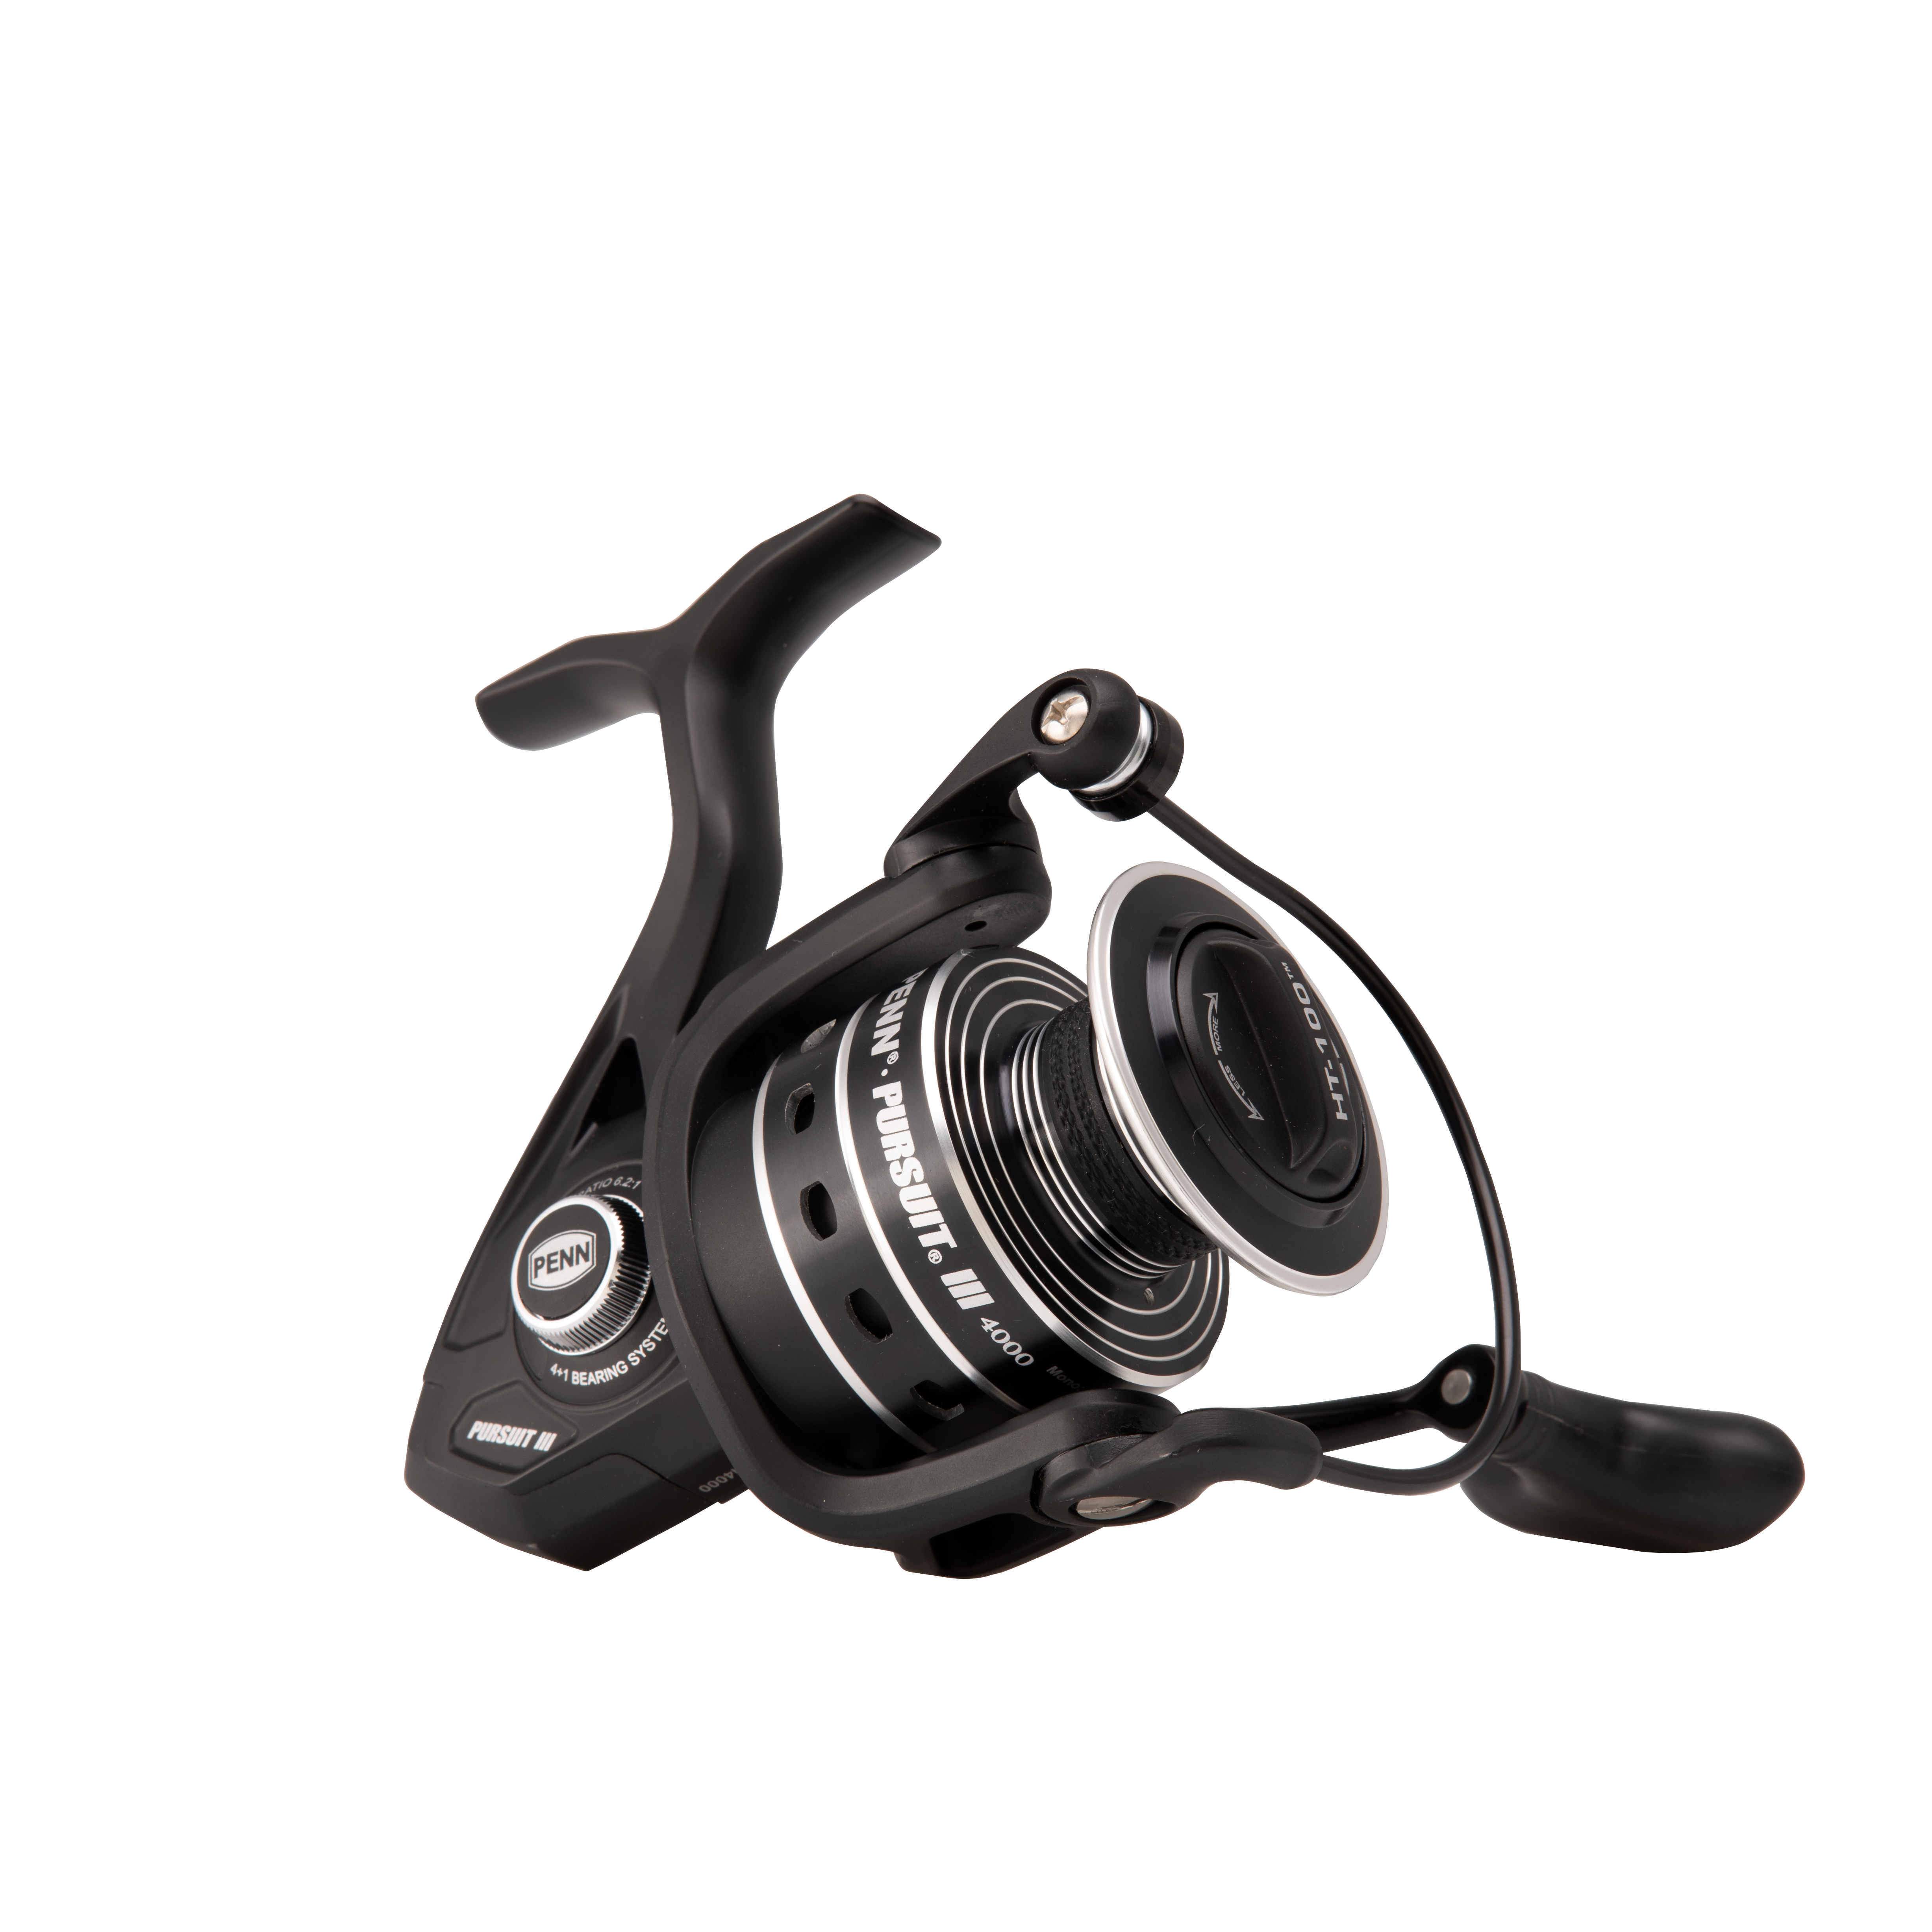 All Sizes Available Brand New Penn Pursuit III 3 Spinning Reels 